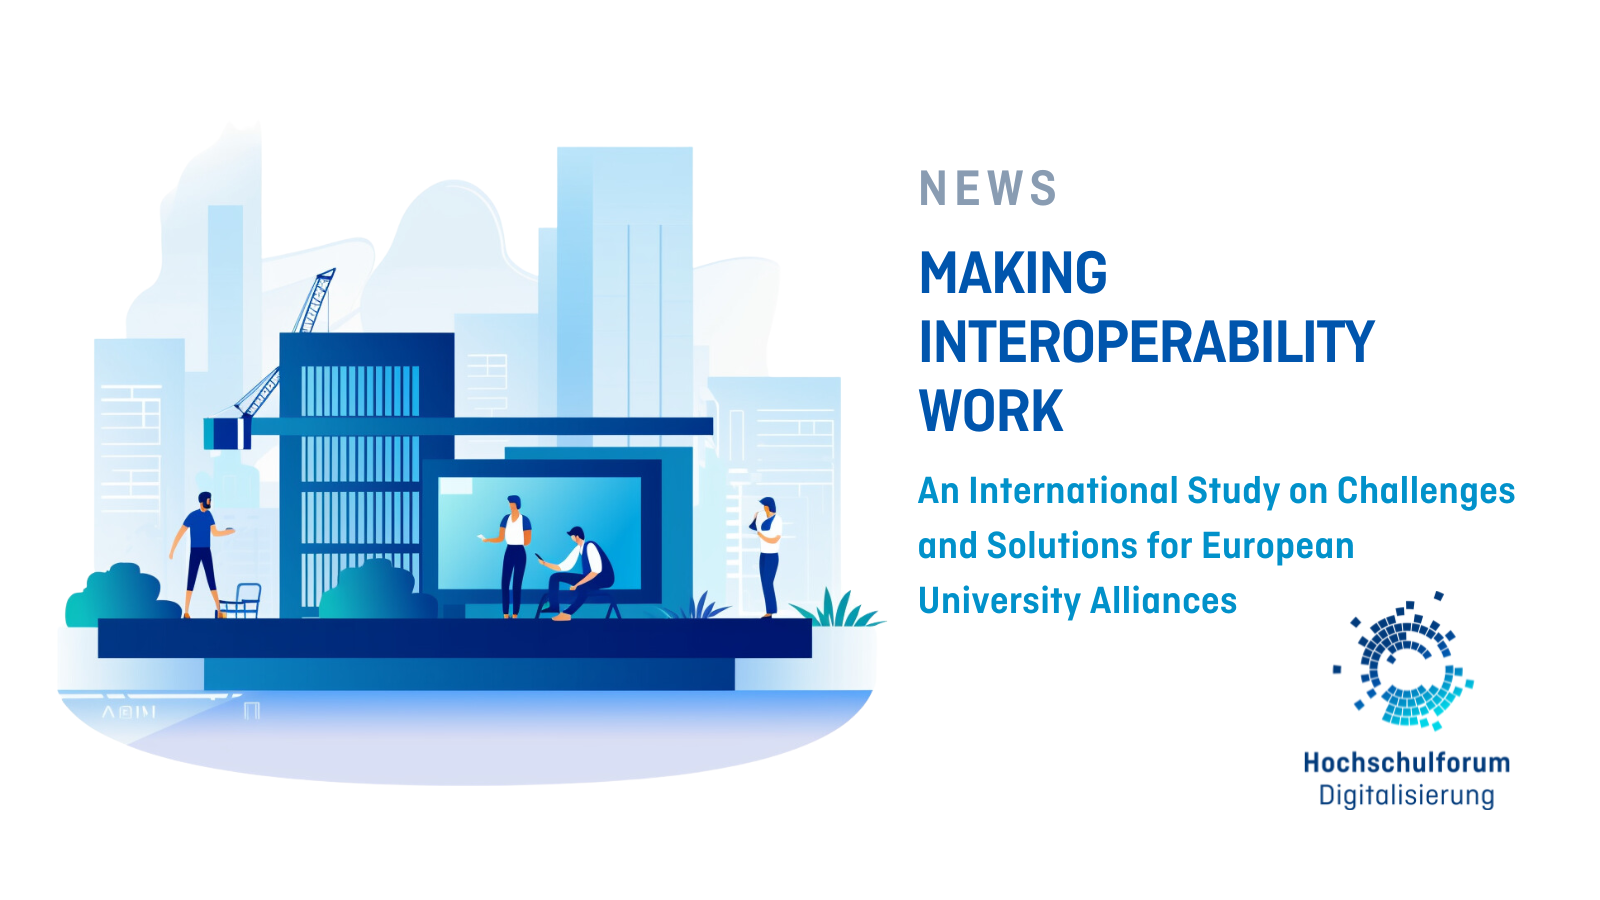 Title of the announcement "REALISING INTEROPERABILITY". Subtitle: "An international study on challenges and solutions for European university alliances". Logo on the bottom right: Hochschulforum Digitalisierung.